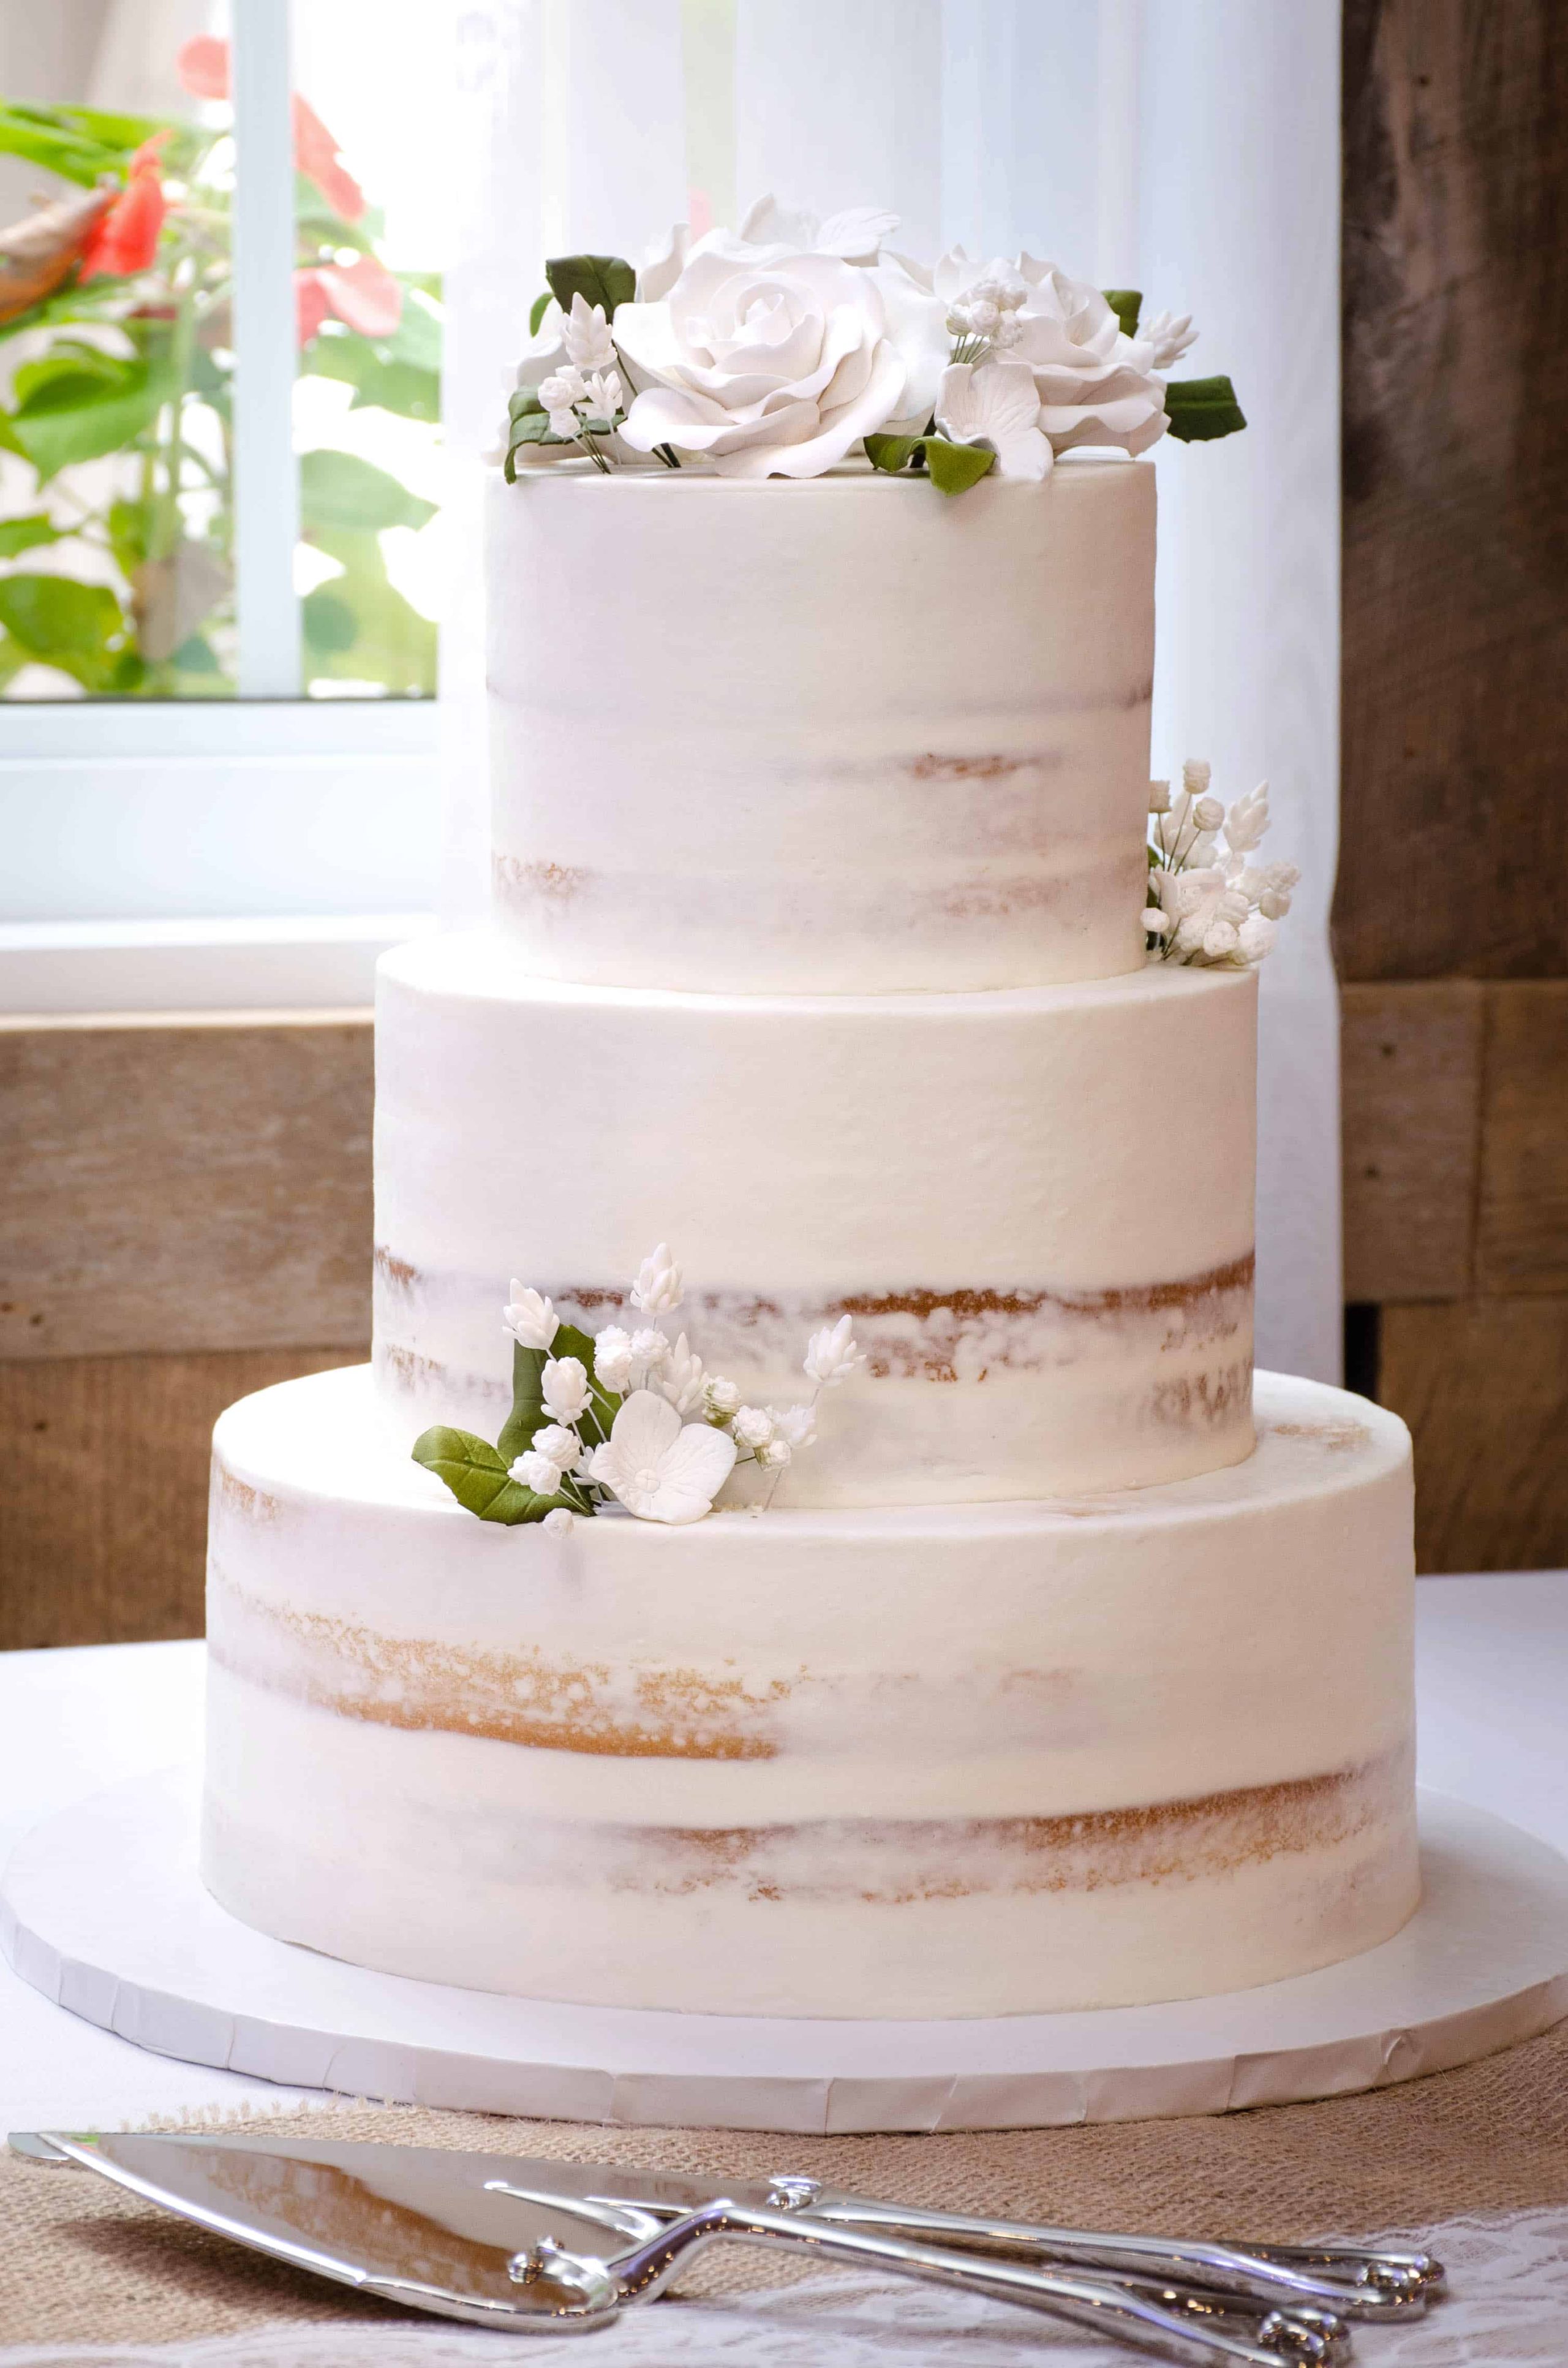 The Bride And Groom Cut Their Beautifully Decorated Naked Wedding Cake